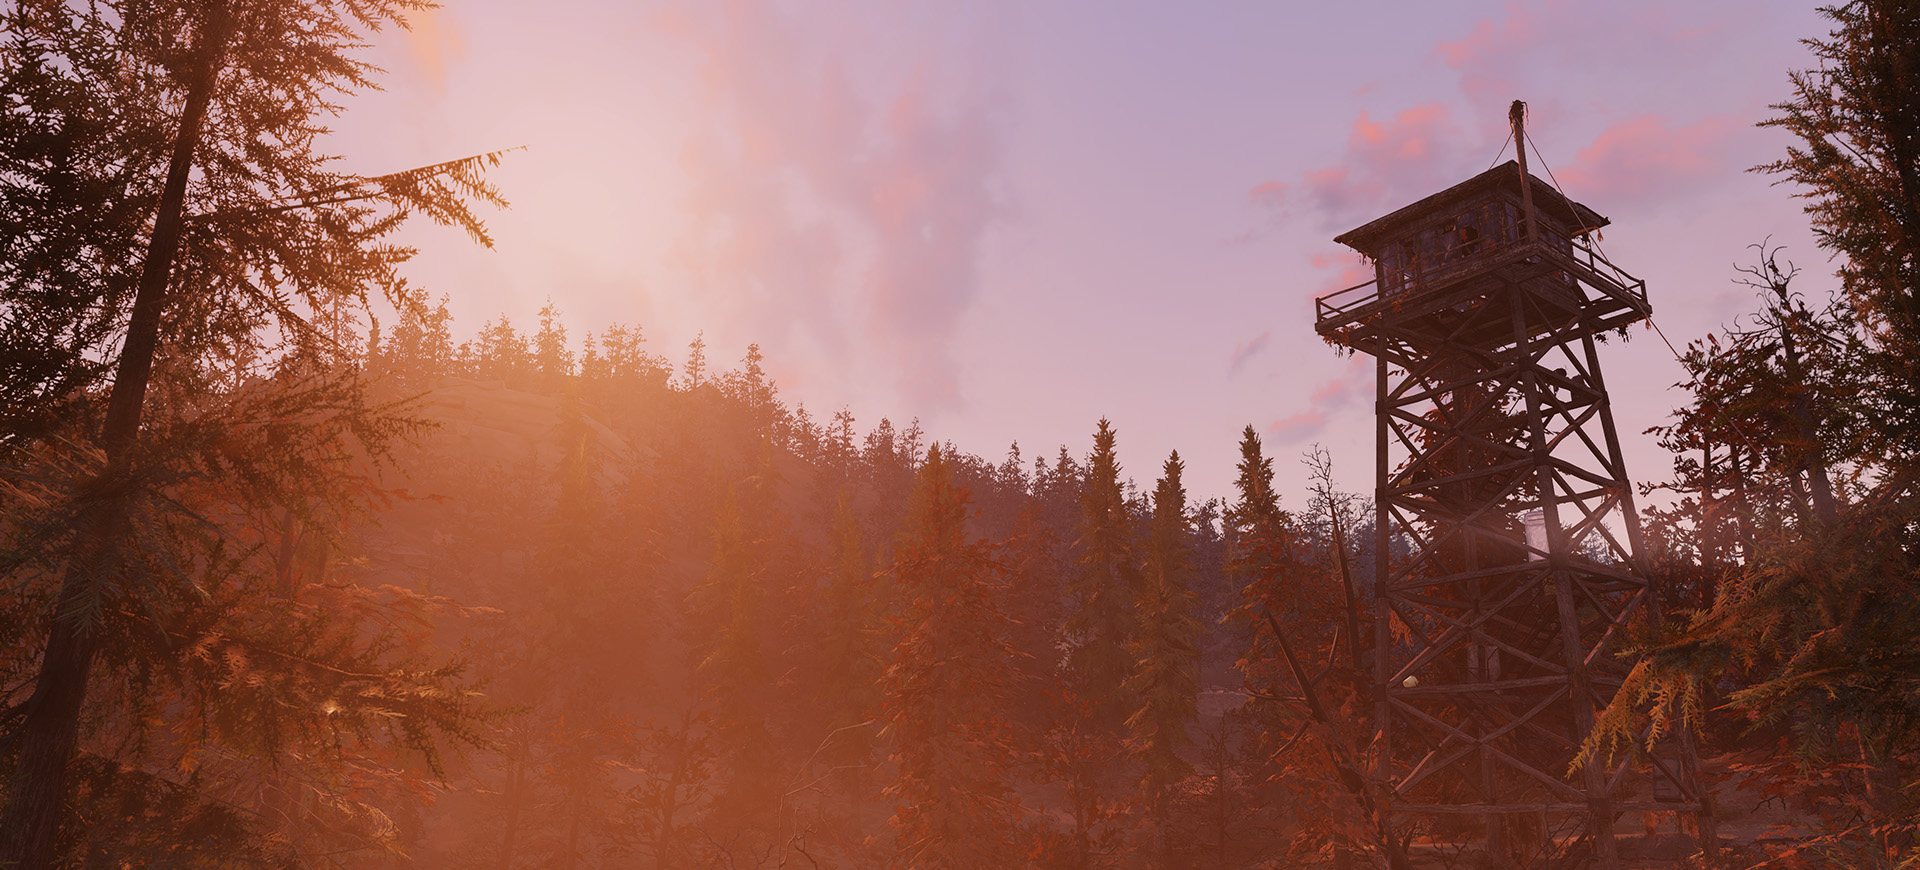 Fallout76_LargeHero_LookoutTower_1920X870.jpg